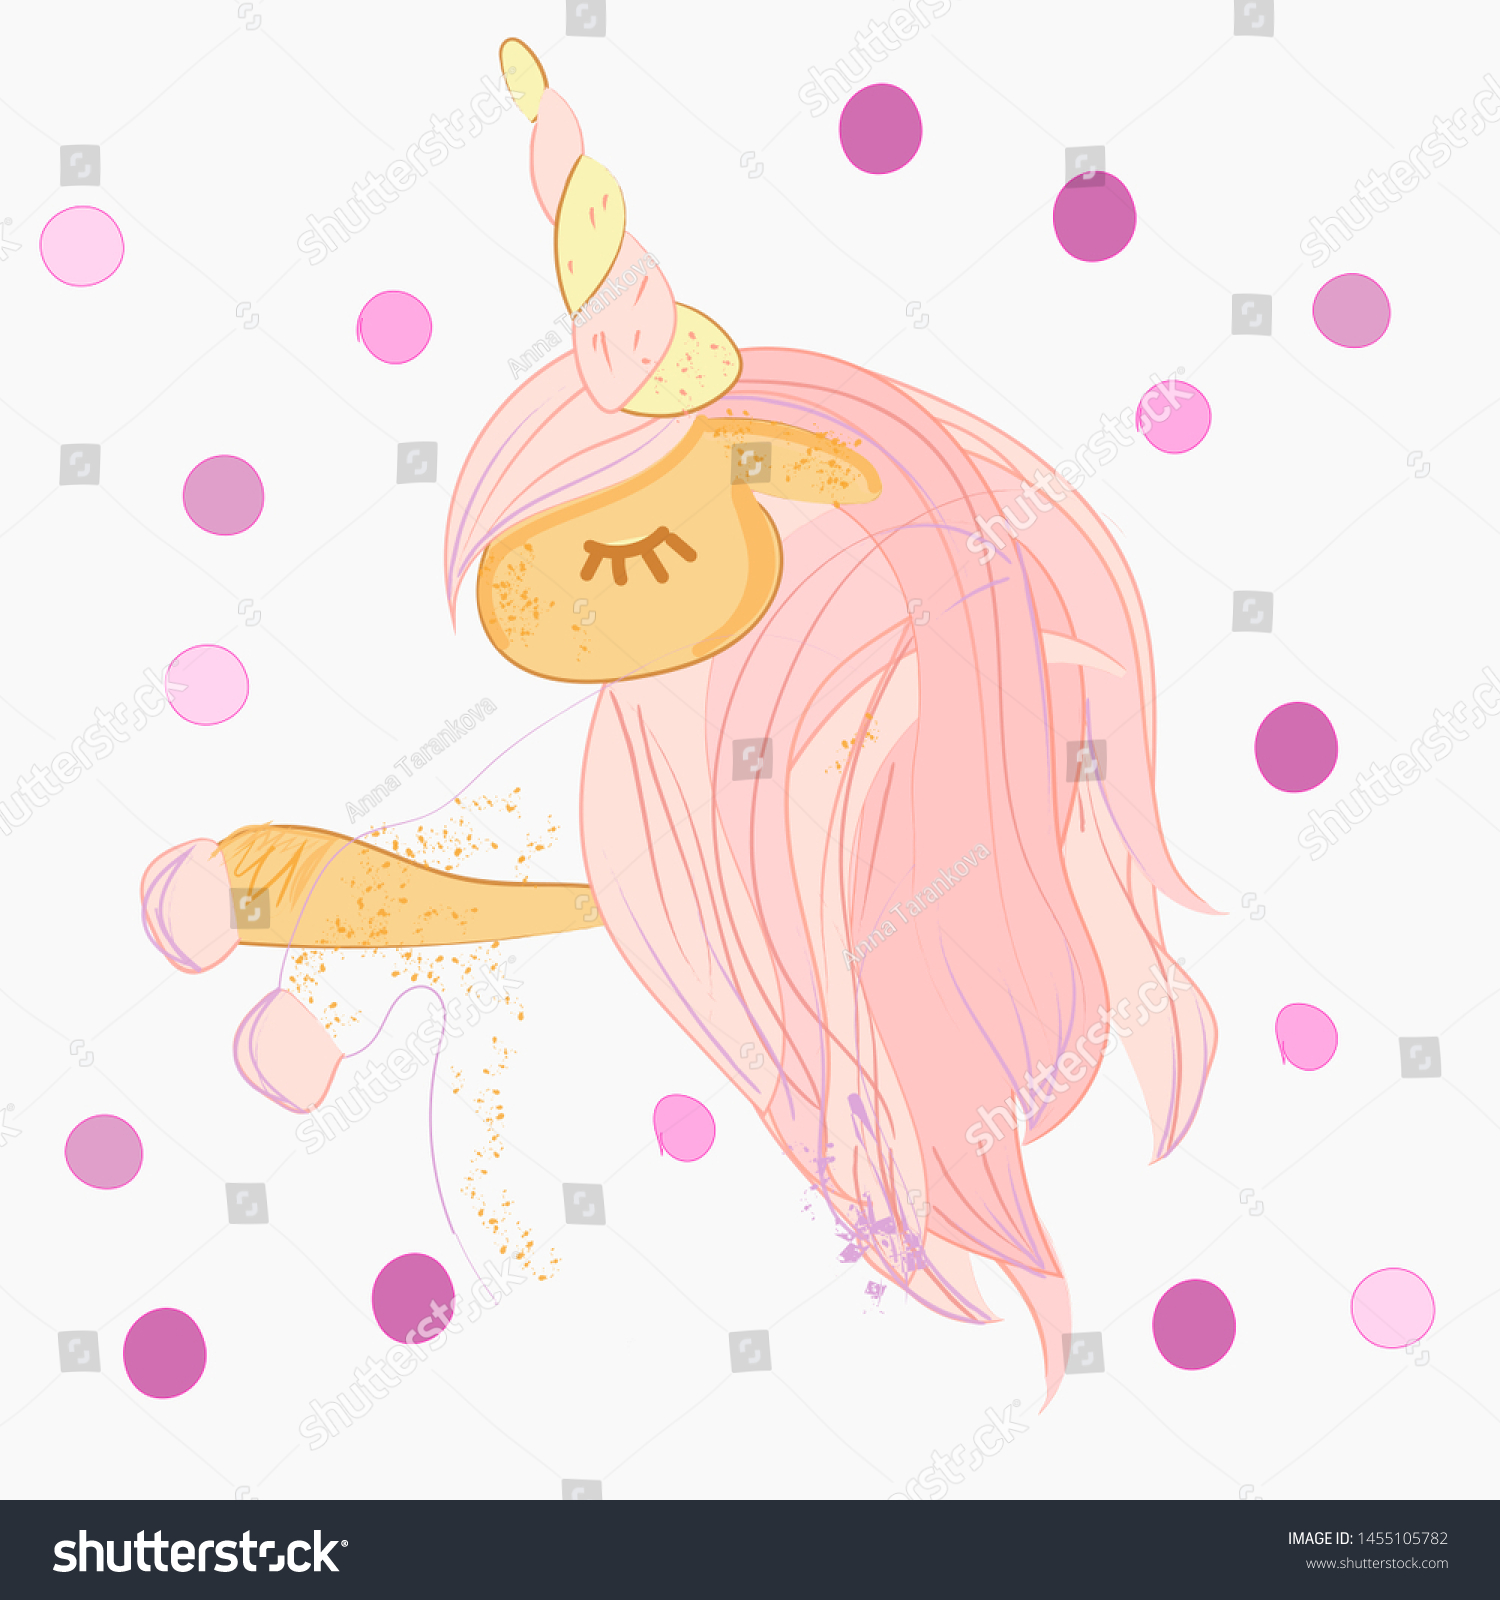 SVG of Cute cartoon little white baby horse with pink hair, beautiful pony princess character, vector illustration isolated on white.Magic cute baby unicorn, my little princess quote poster, greeting card, v svg